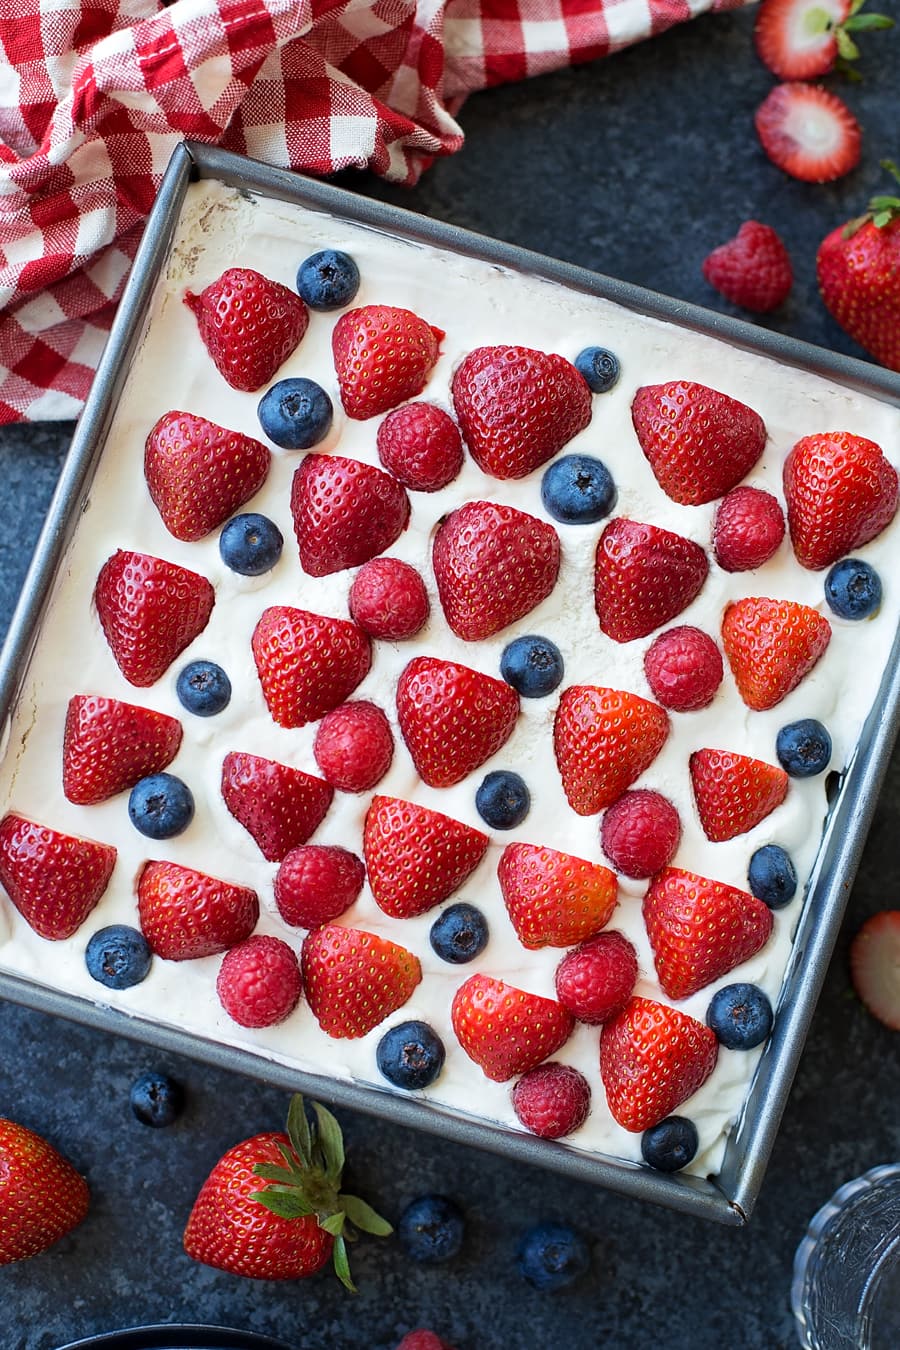 Frosted icebox cake topped with fresh berries